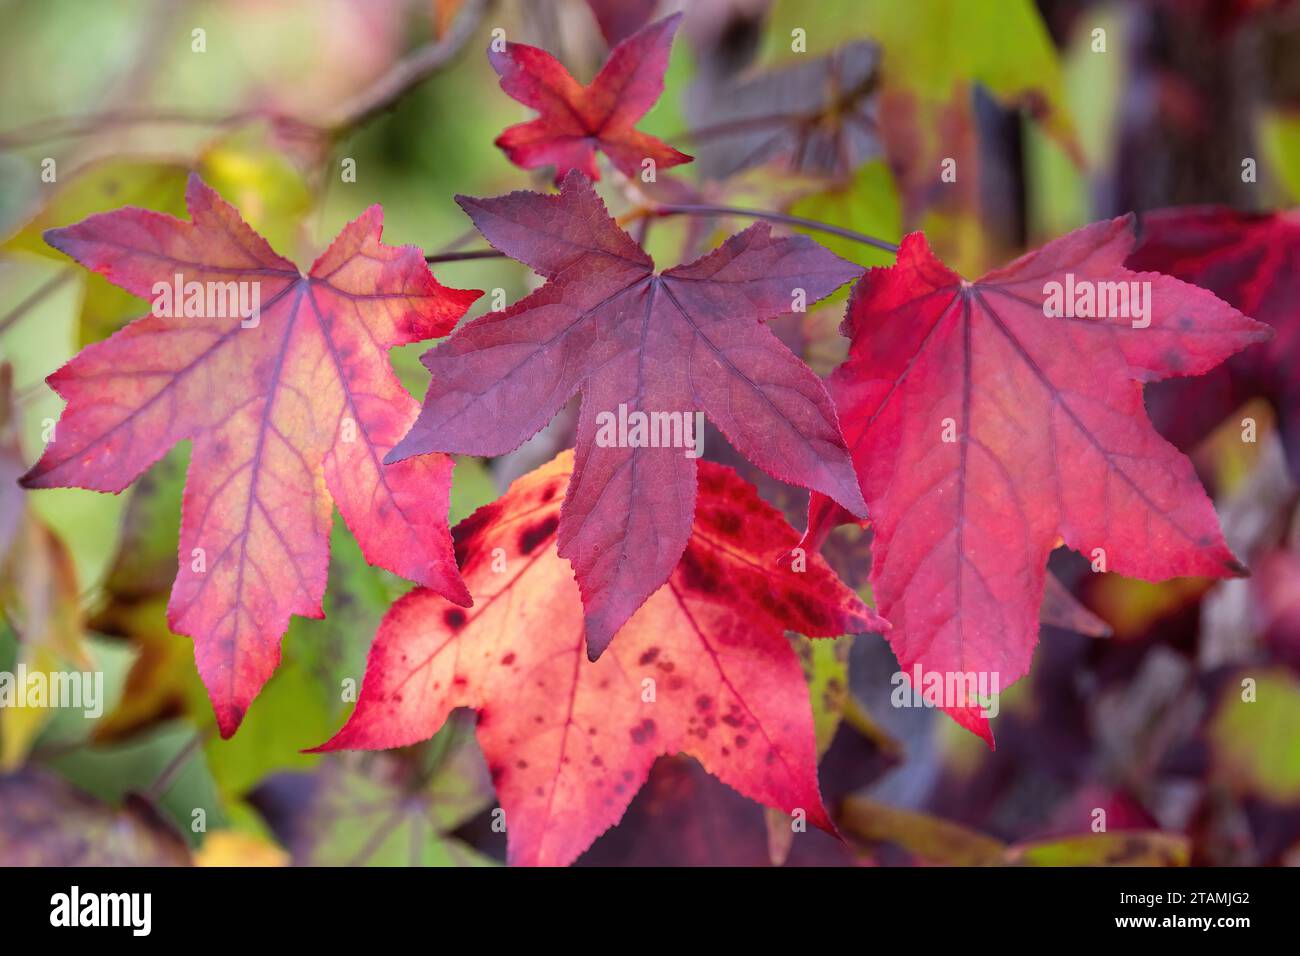 Colorful Brightly Lit Autumn Leaves Stock Photo